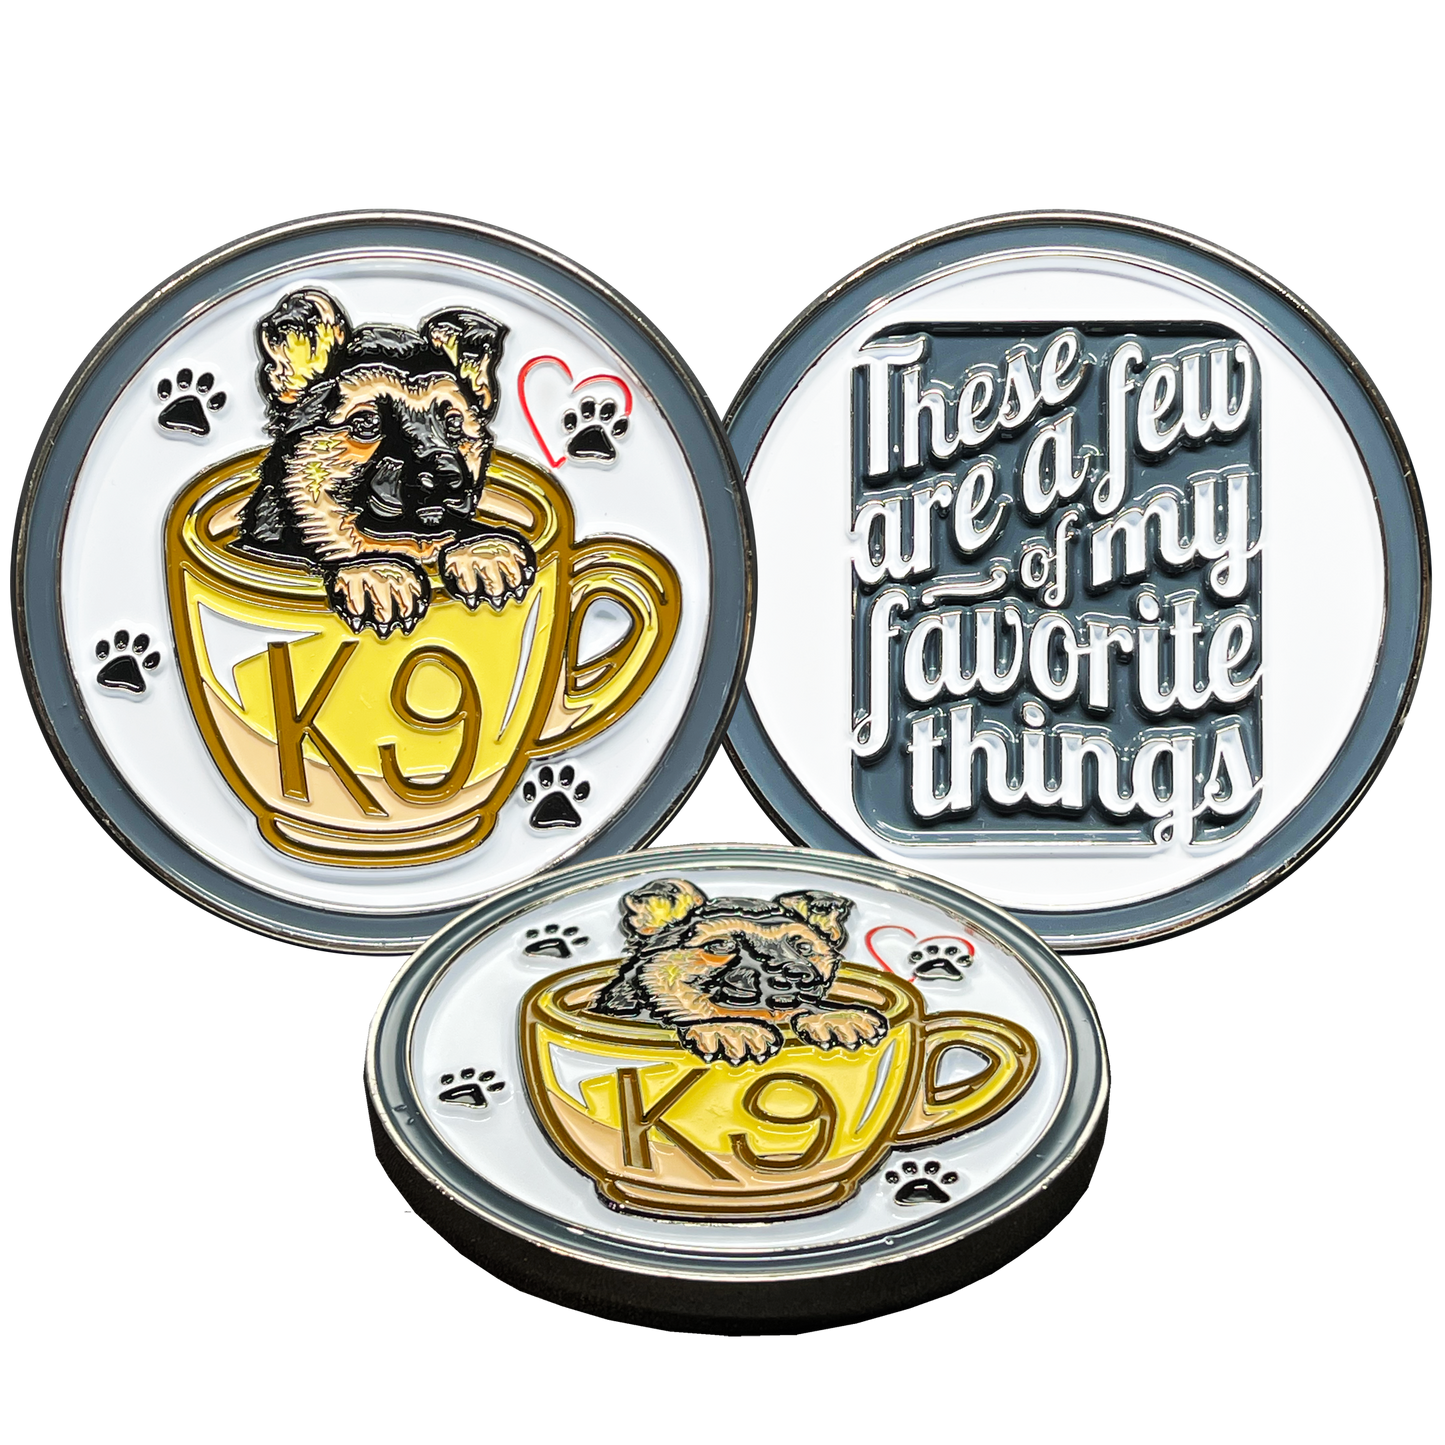 BL14-003 Cute K9 Puppy in coffee mug canine challenge coin police service dog handler